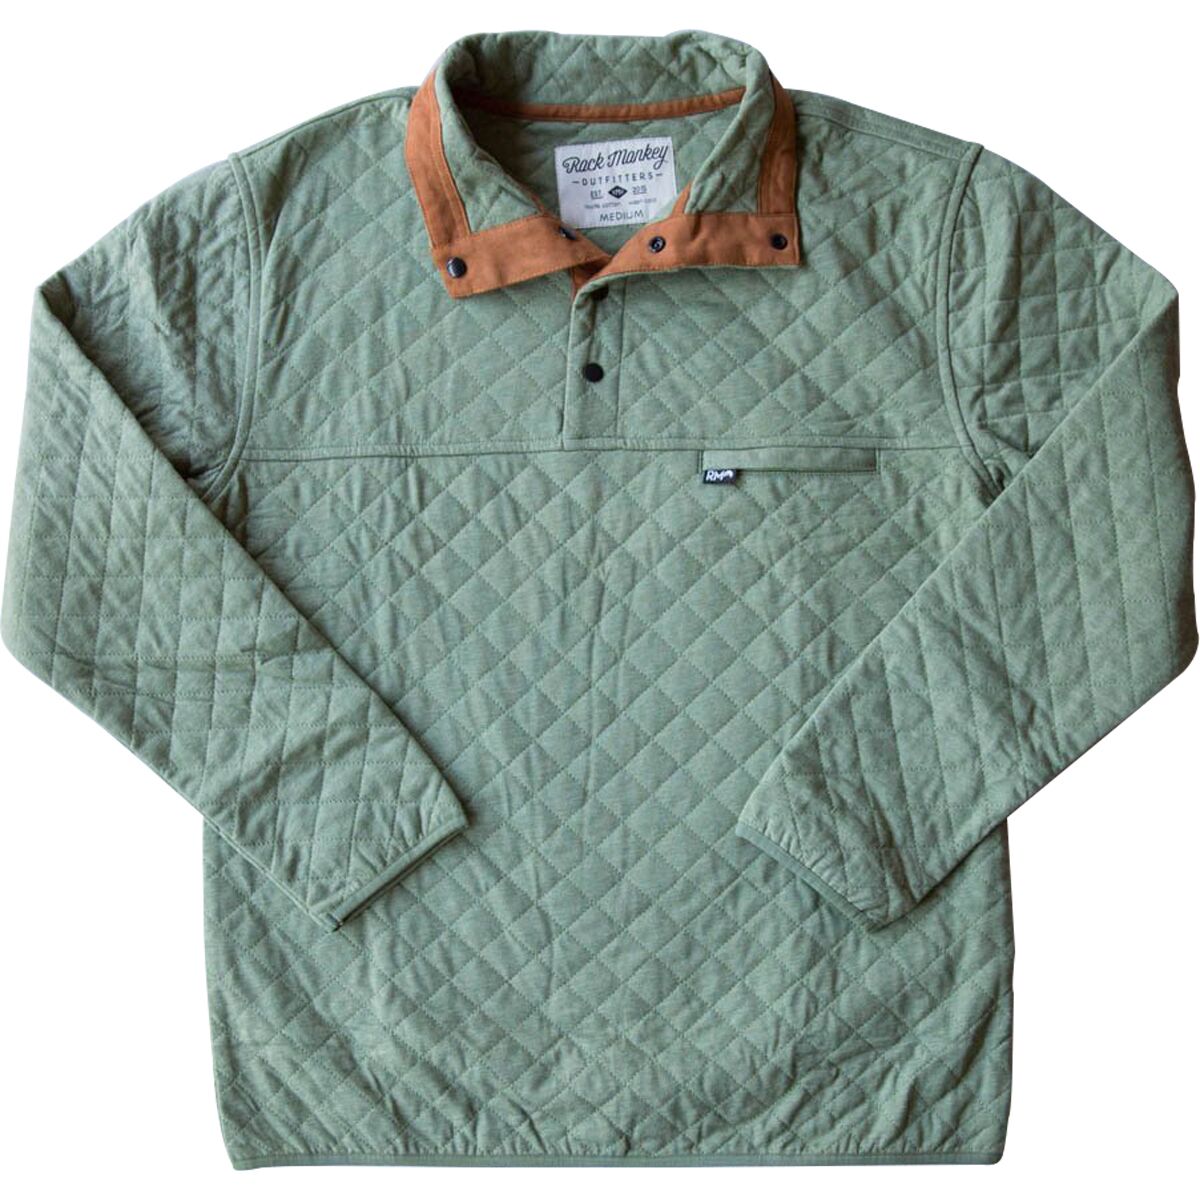 RCKMNKY Quilted Pullover - Men's